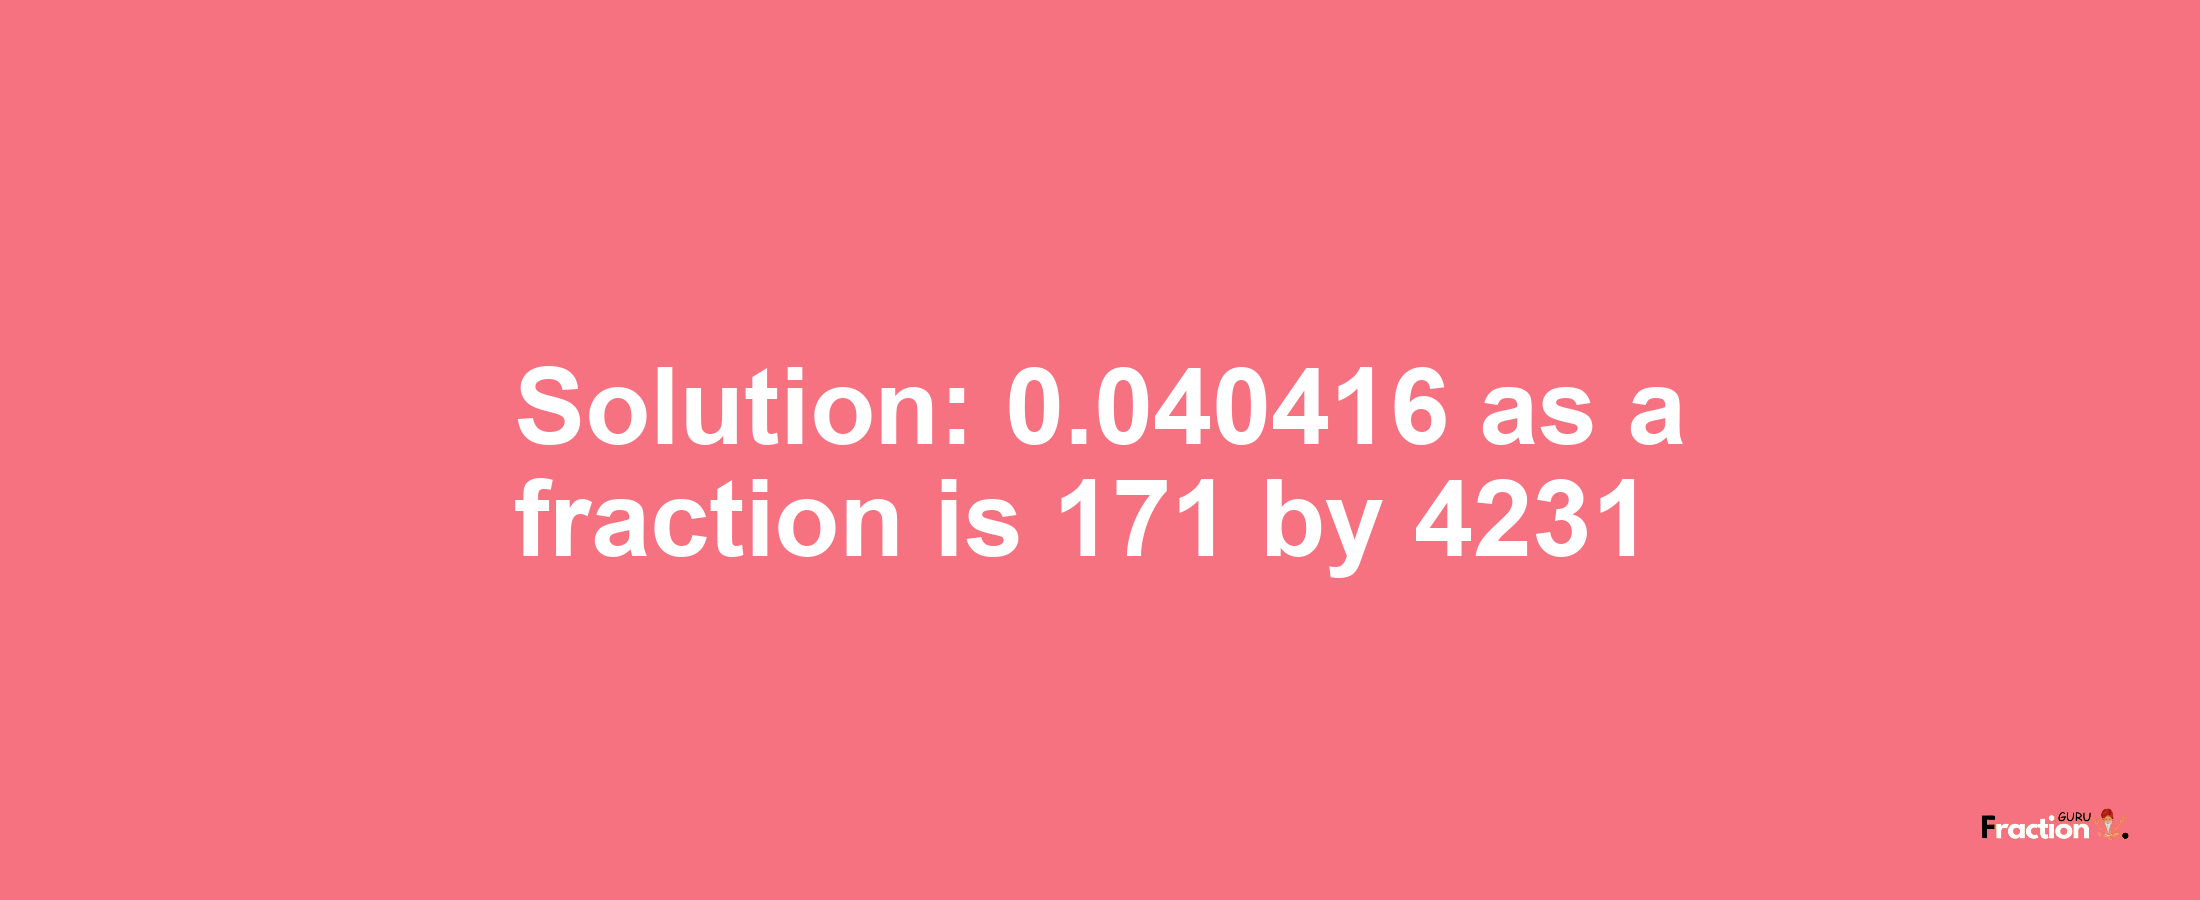 Solution:0.040416 as a fraction is 171/4231